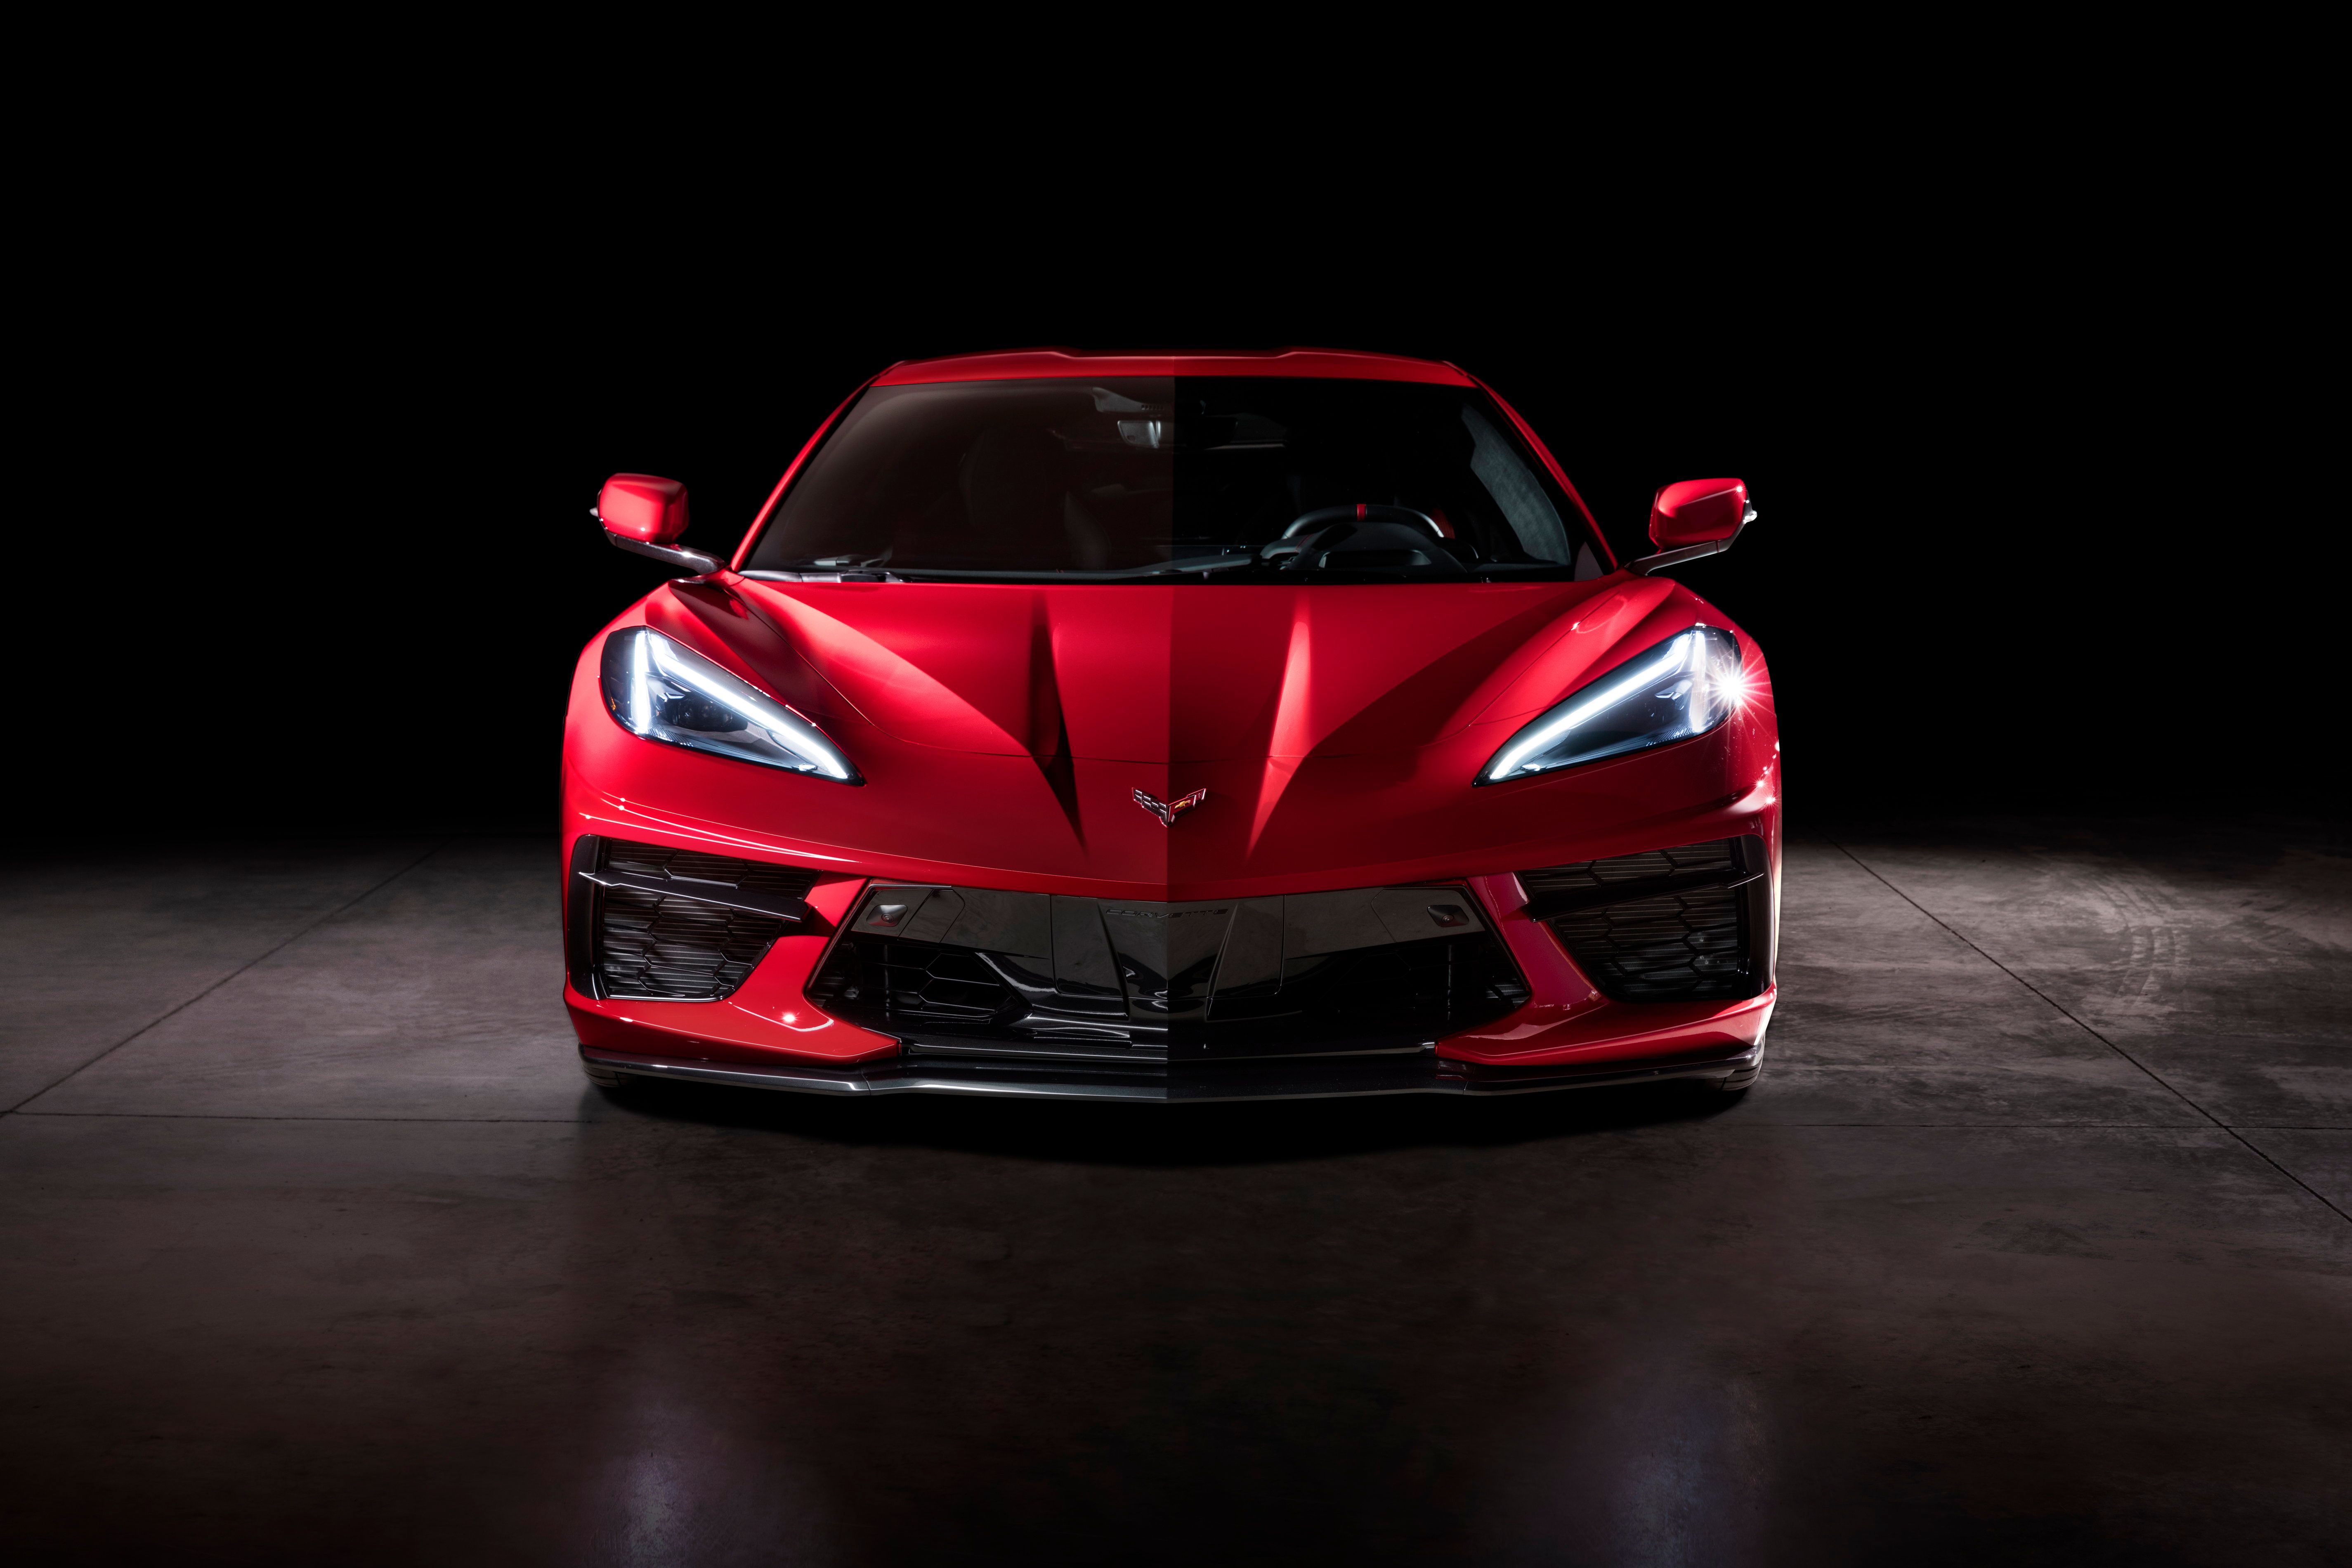 2020 Book Your 2020 C8 Corvette ASAP Because Chevrolet Is Going to Hike the Prices for the Next Model Year